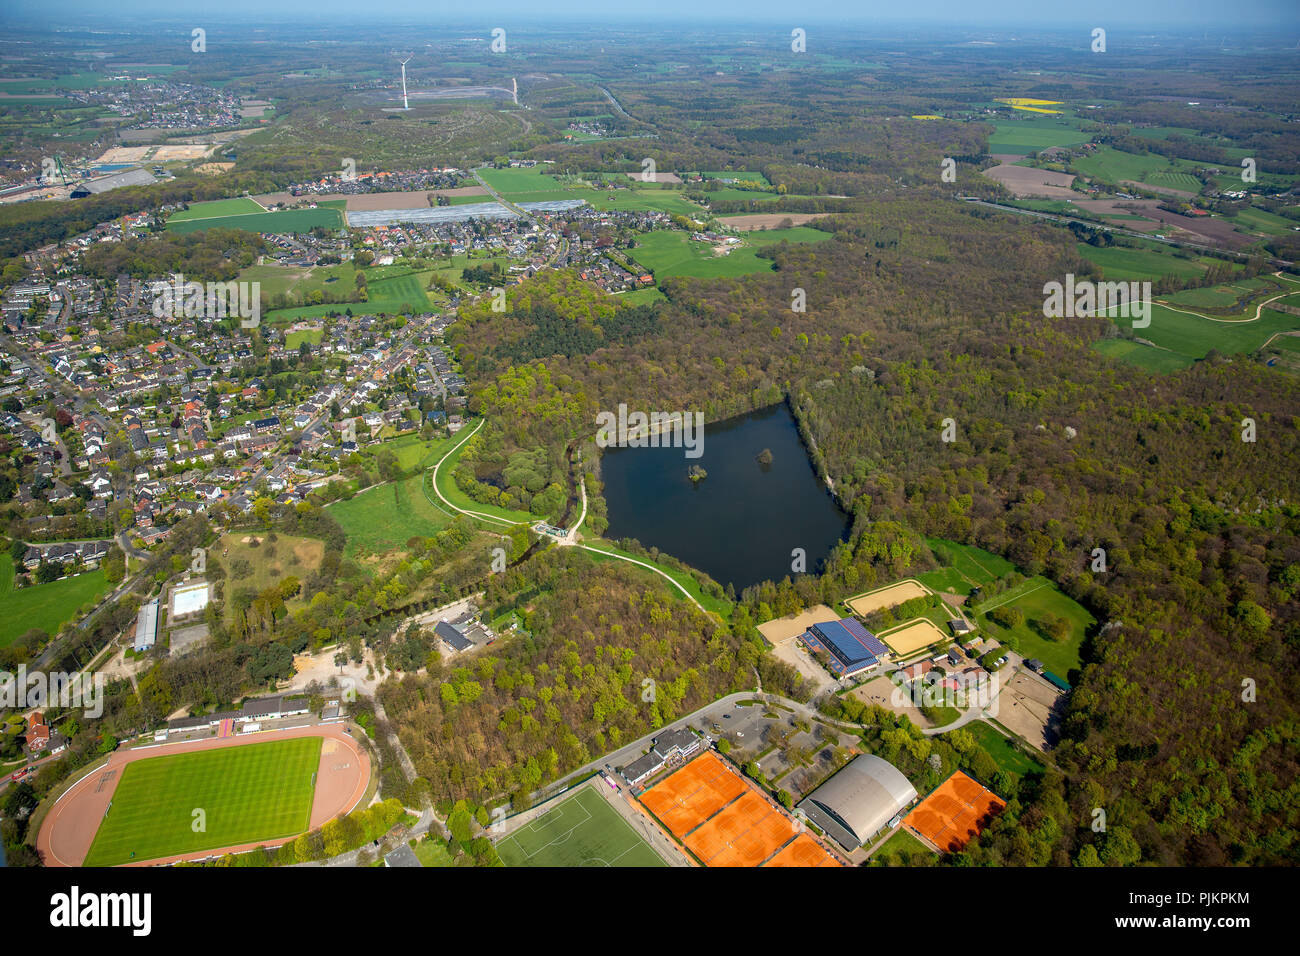 Rotbachsee weir in Dinslaken, Lippeverband, nature conservation, water management, Dinslaken, Ruhr area, North Rhine-Westphalia, Germany Stock Photo